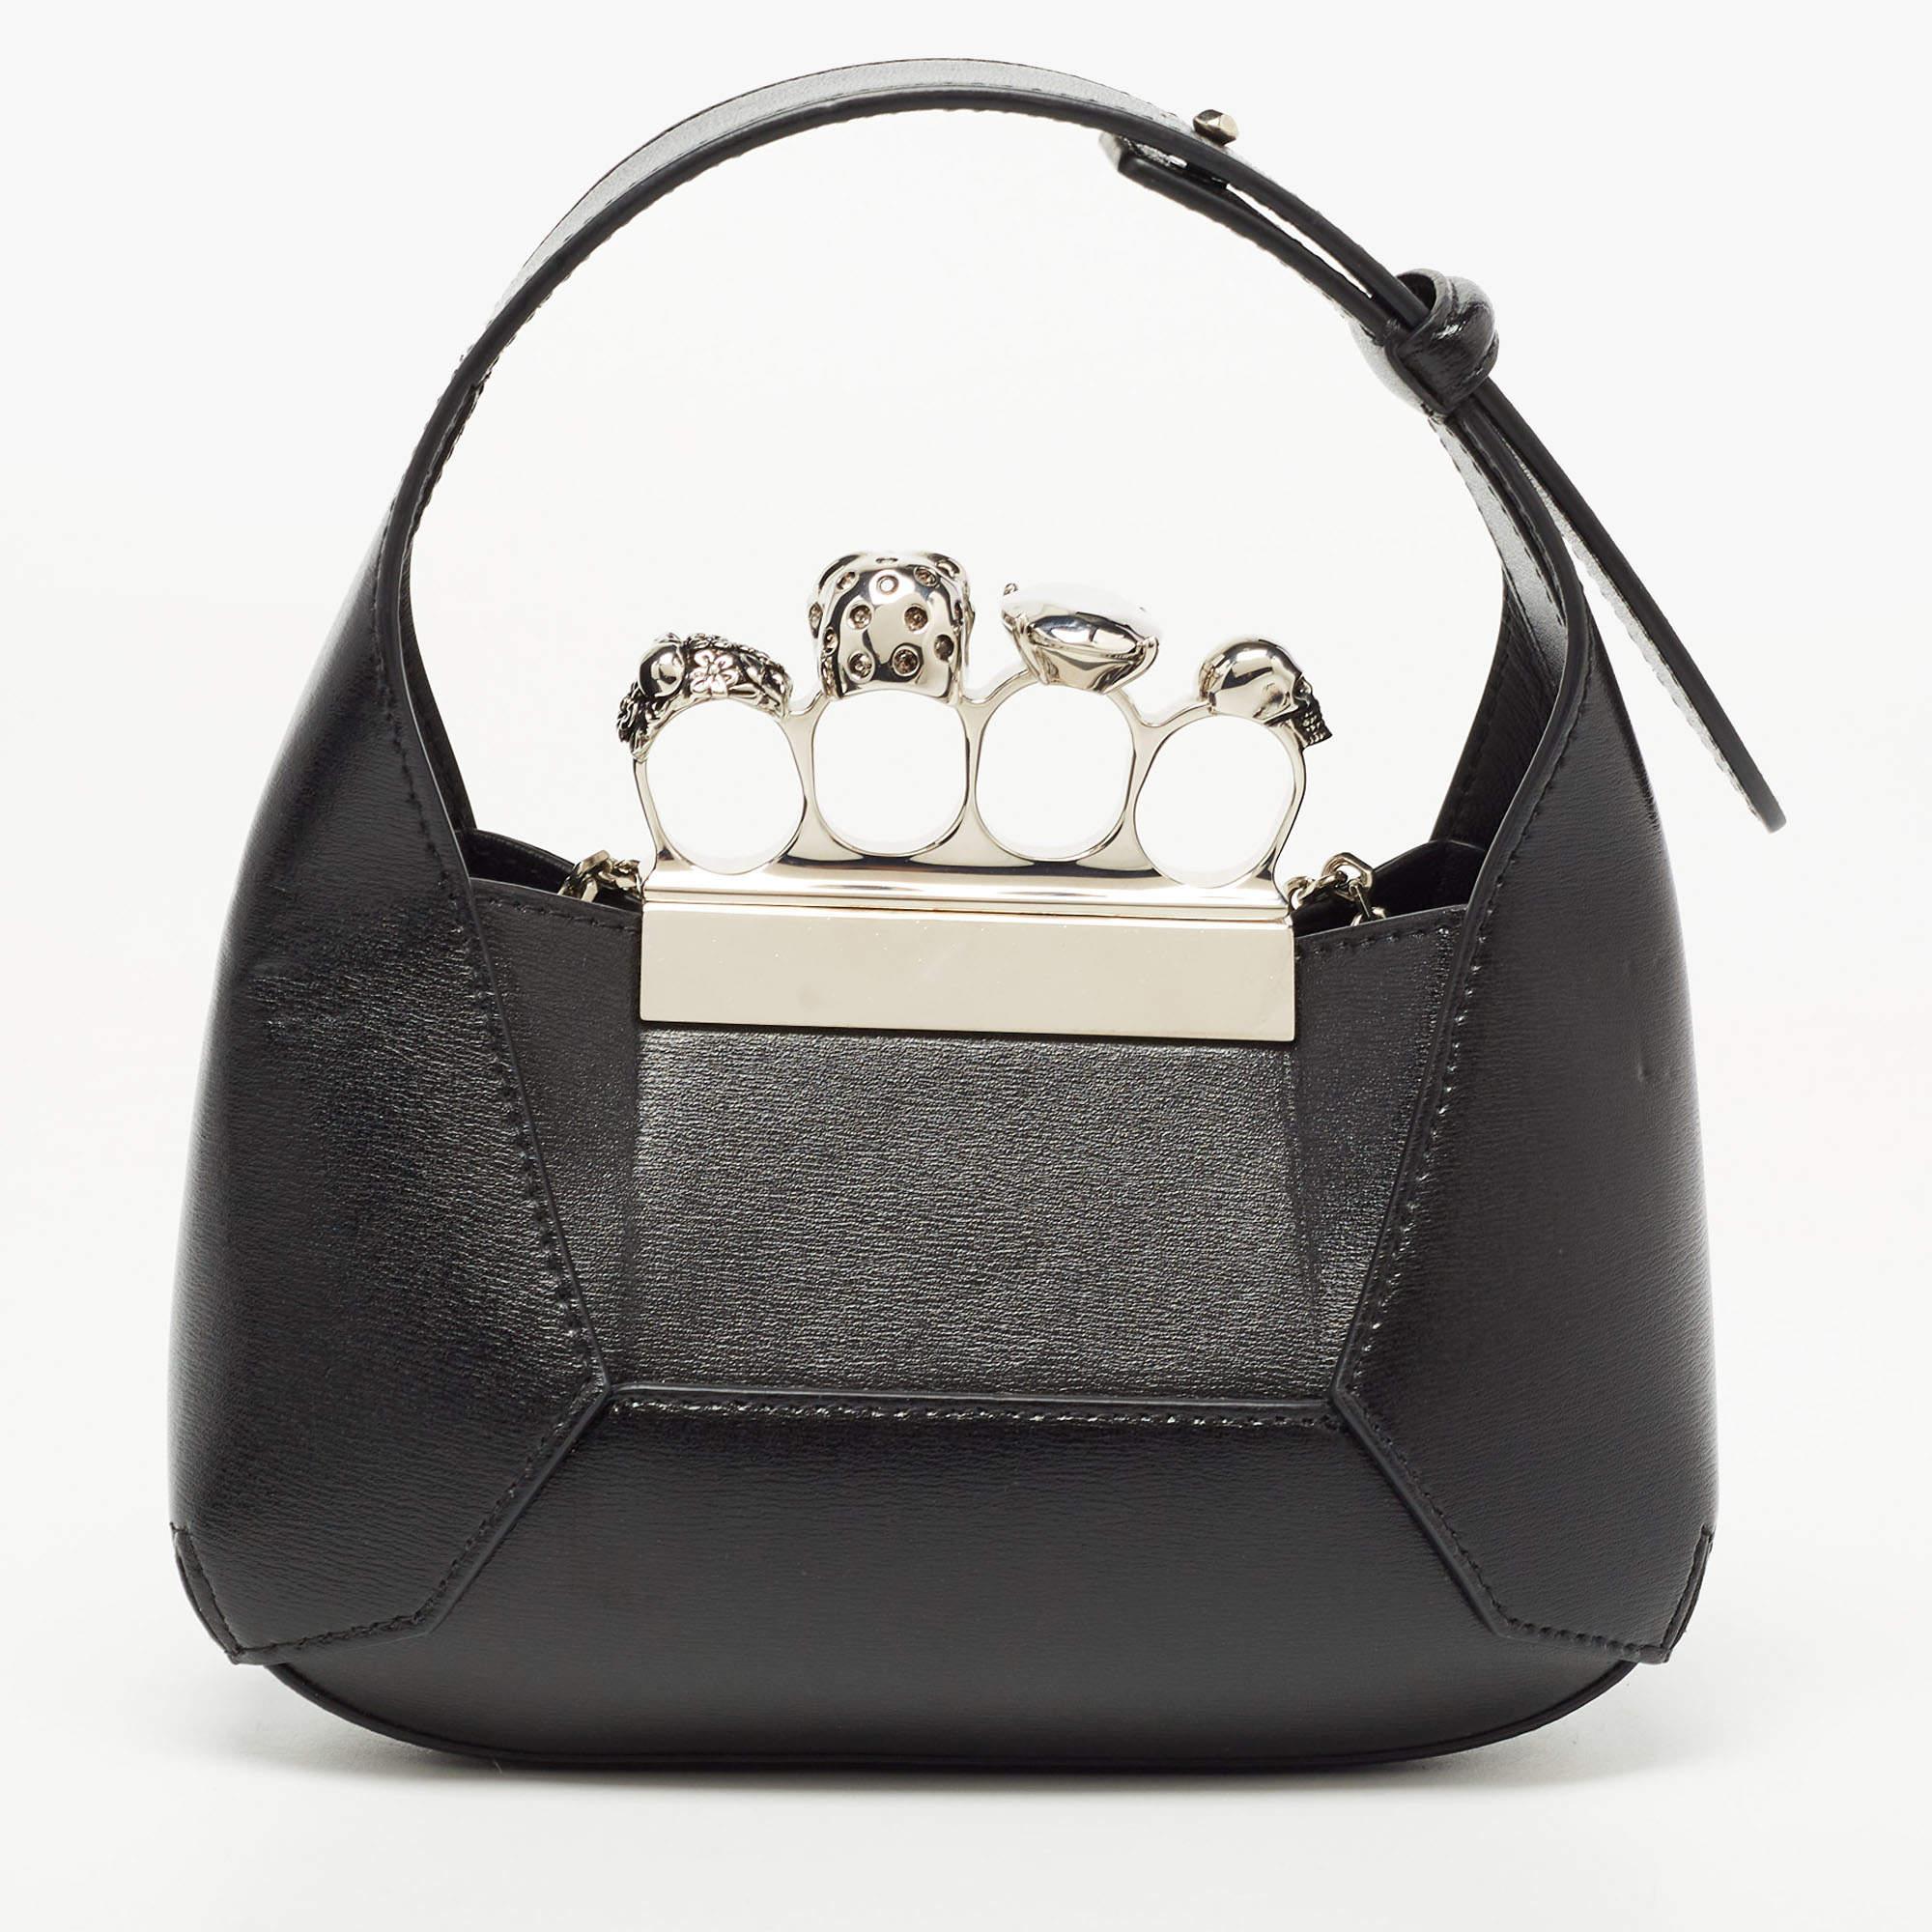 Stylish handbags never fail to make a fashionable impression. Make this designer hobo yours by pairing it with your sophisticated workwear as well as chic casual looks.

Includes: Detachable Chain Strap